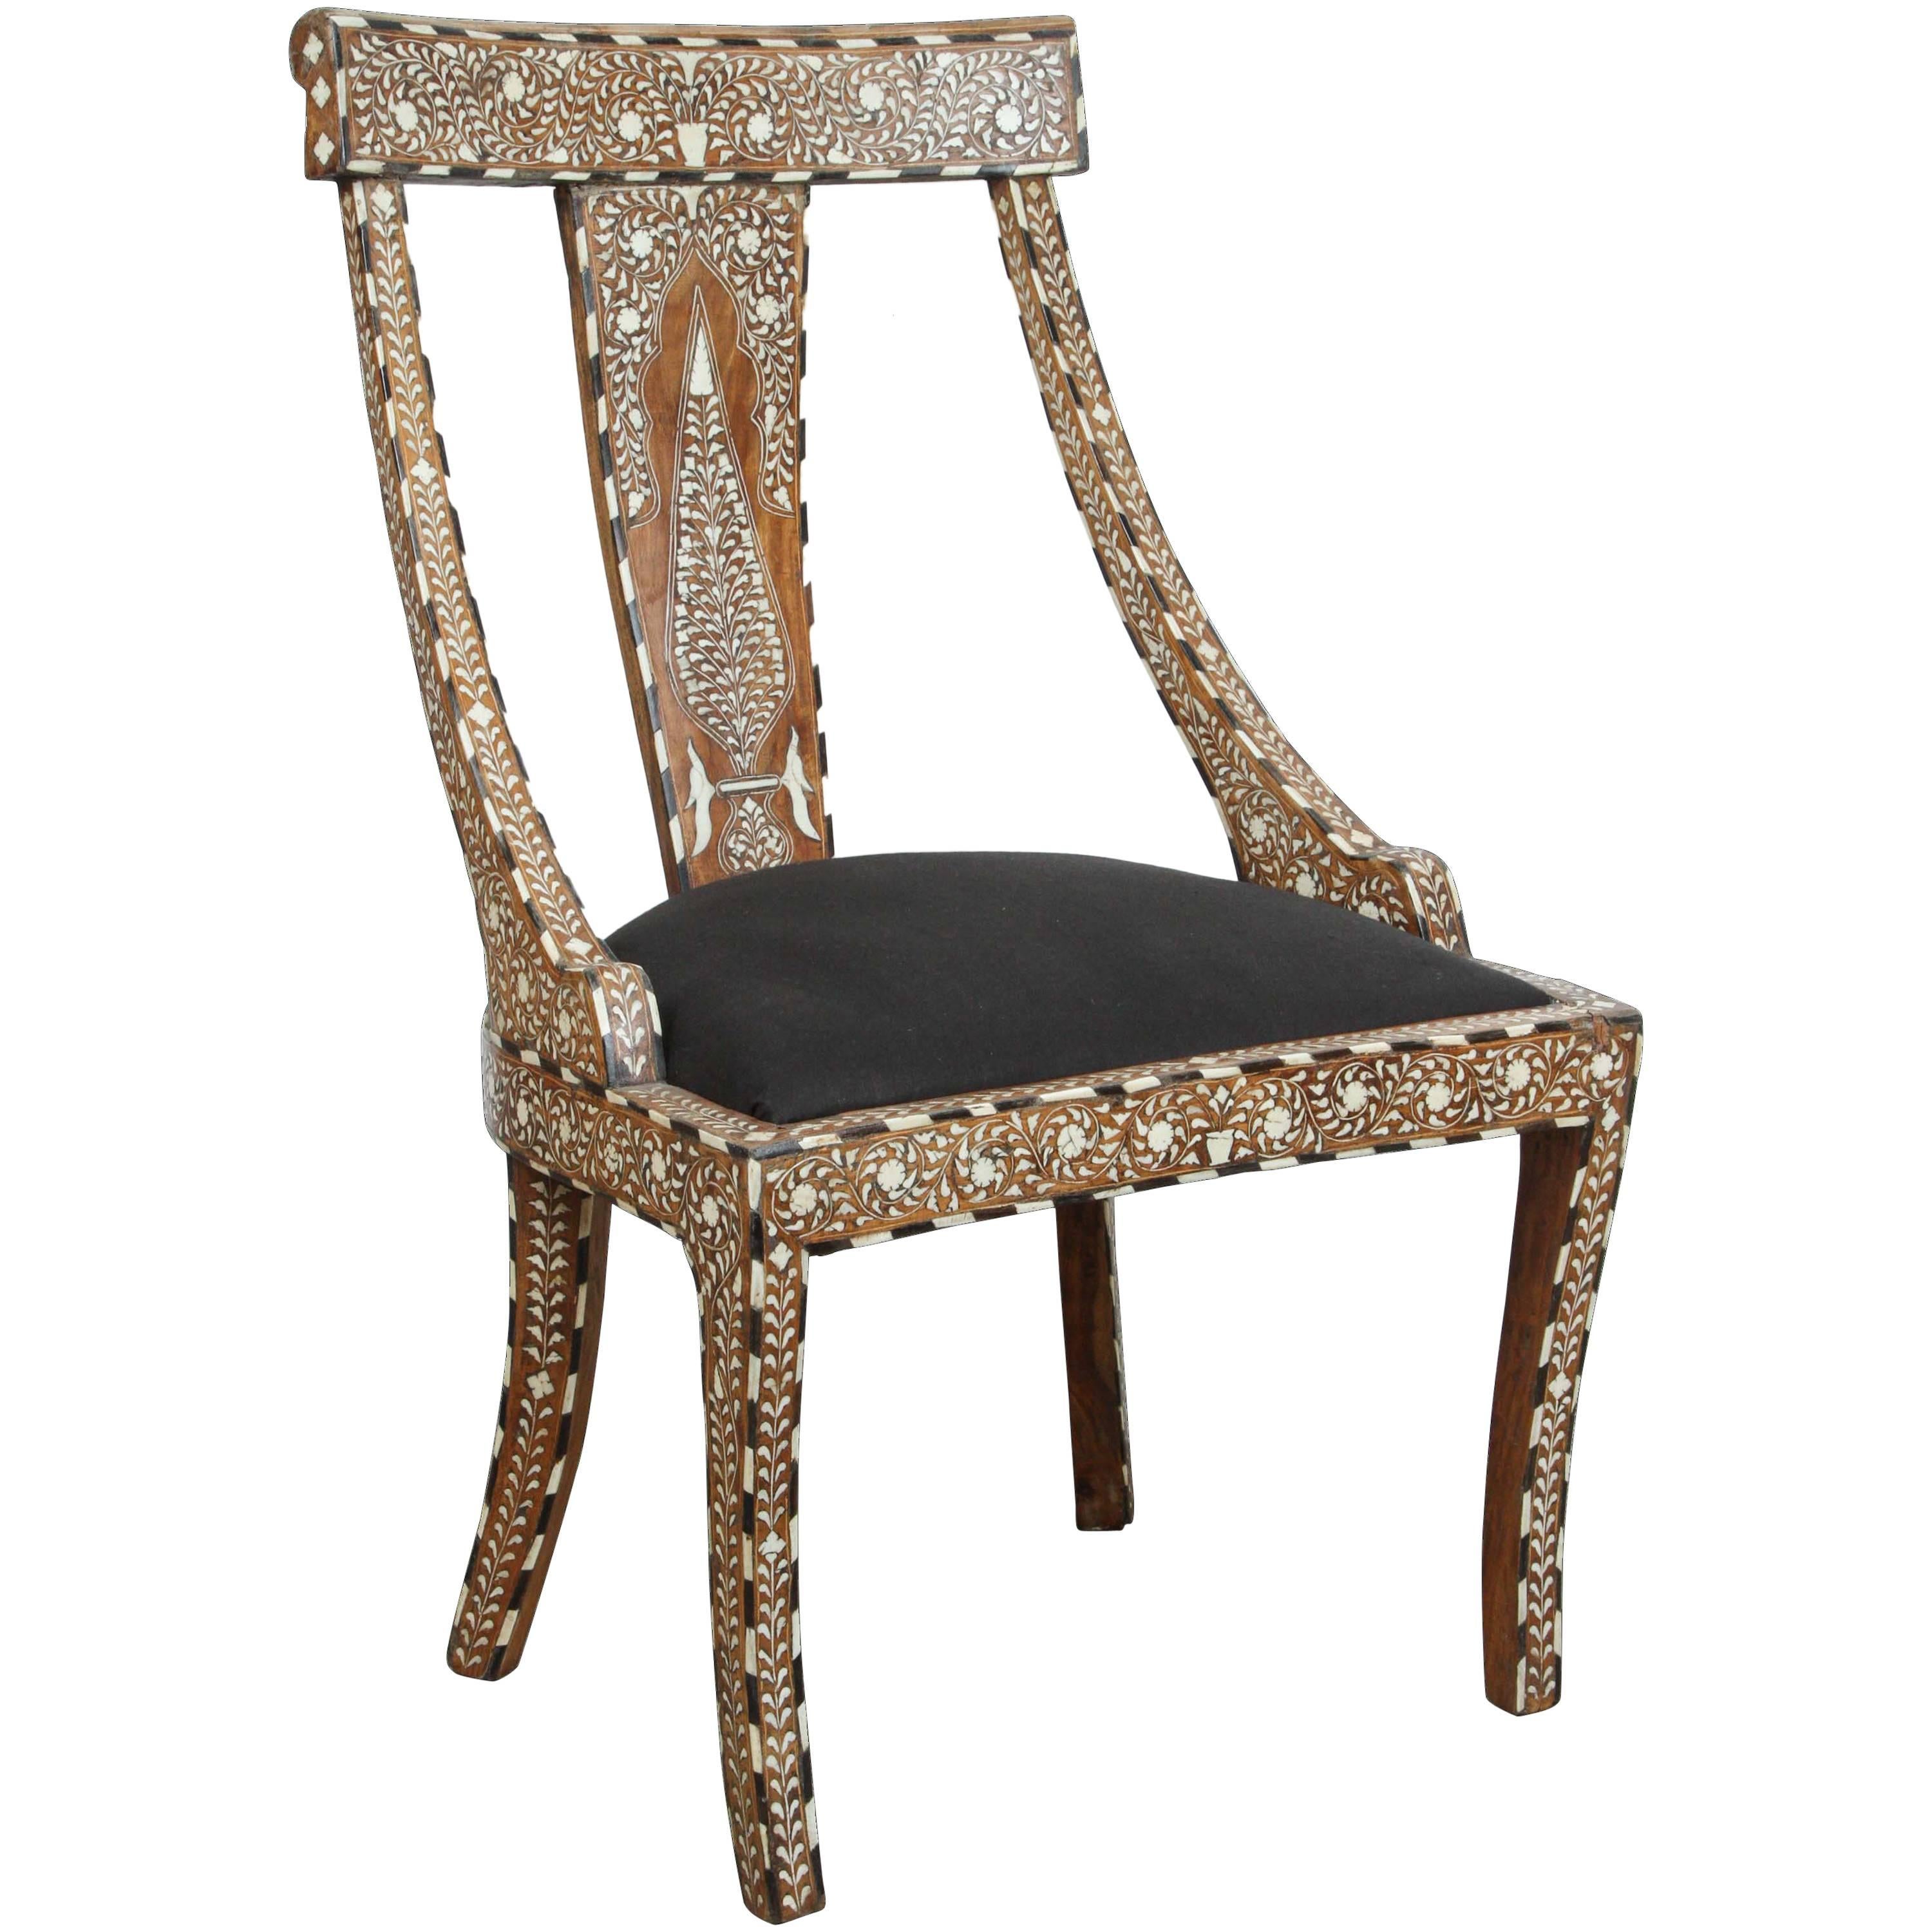 19th Century Anglo-Indian Bone Inlay Side Chair